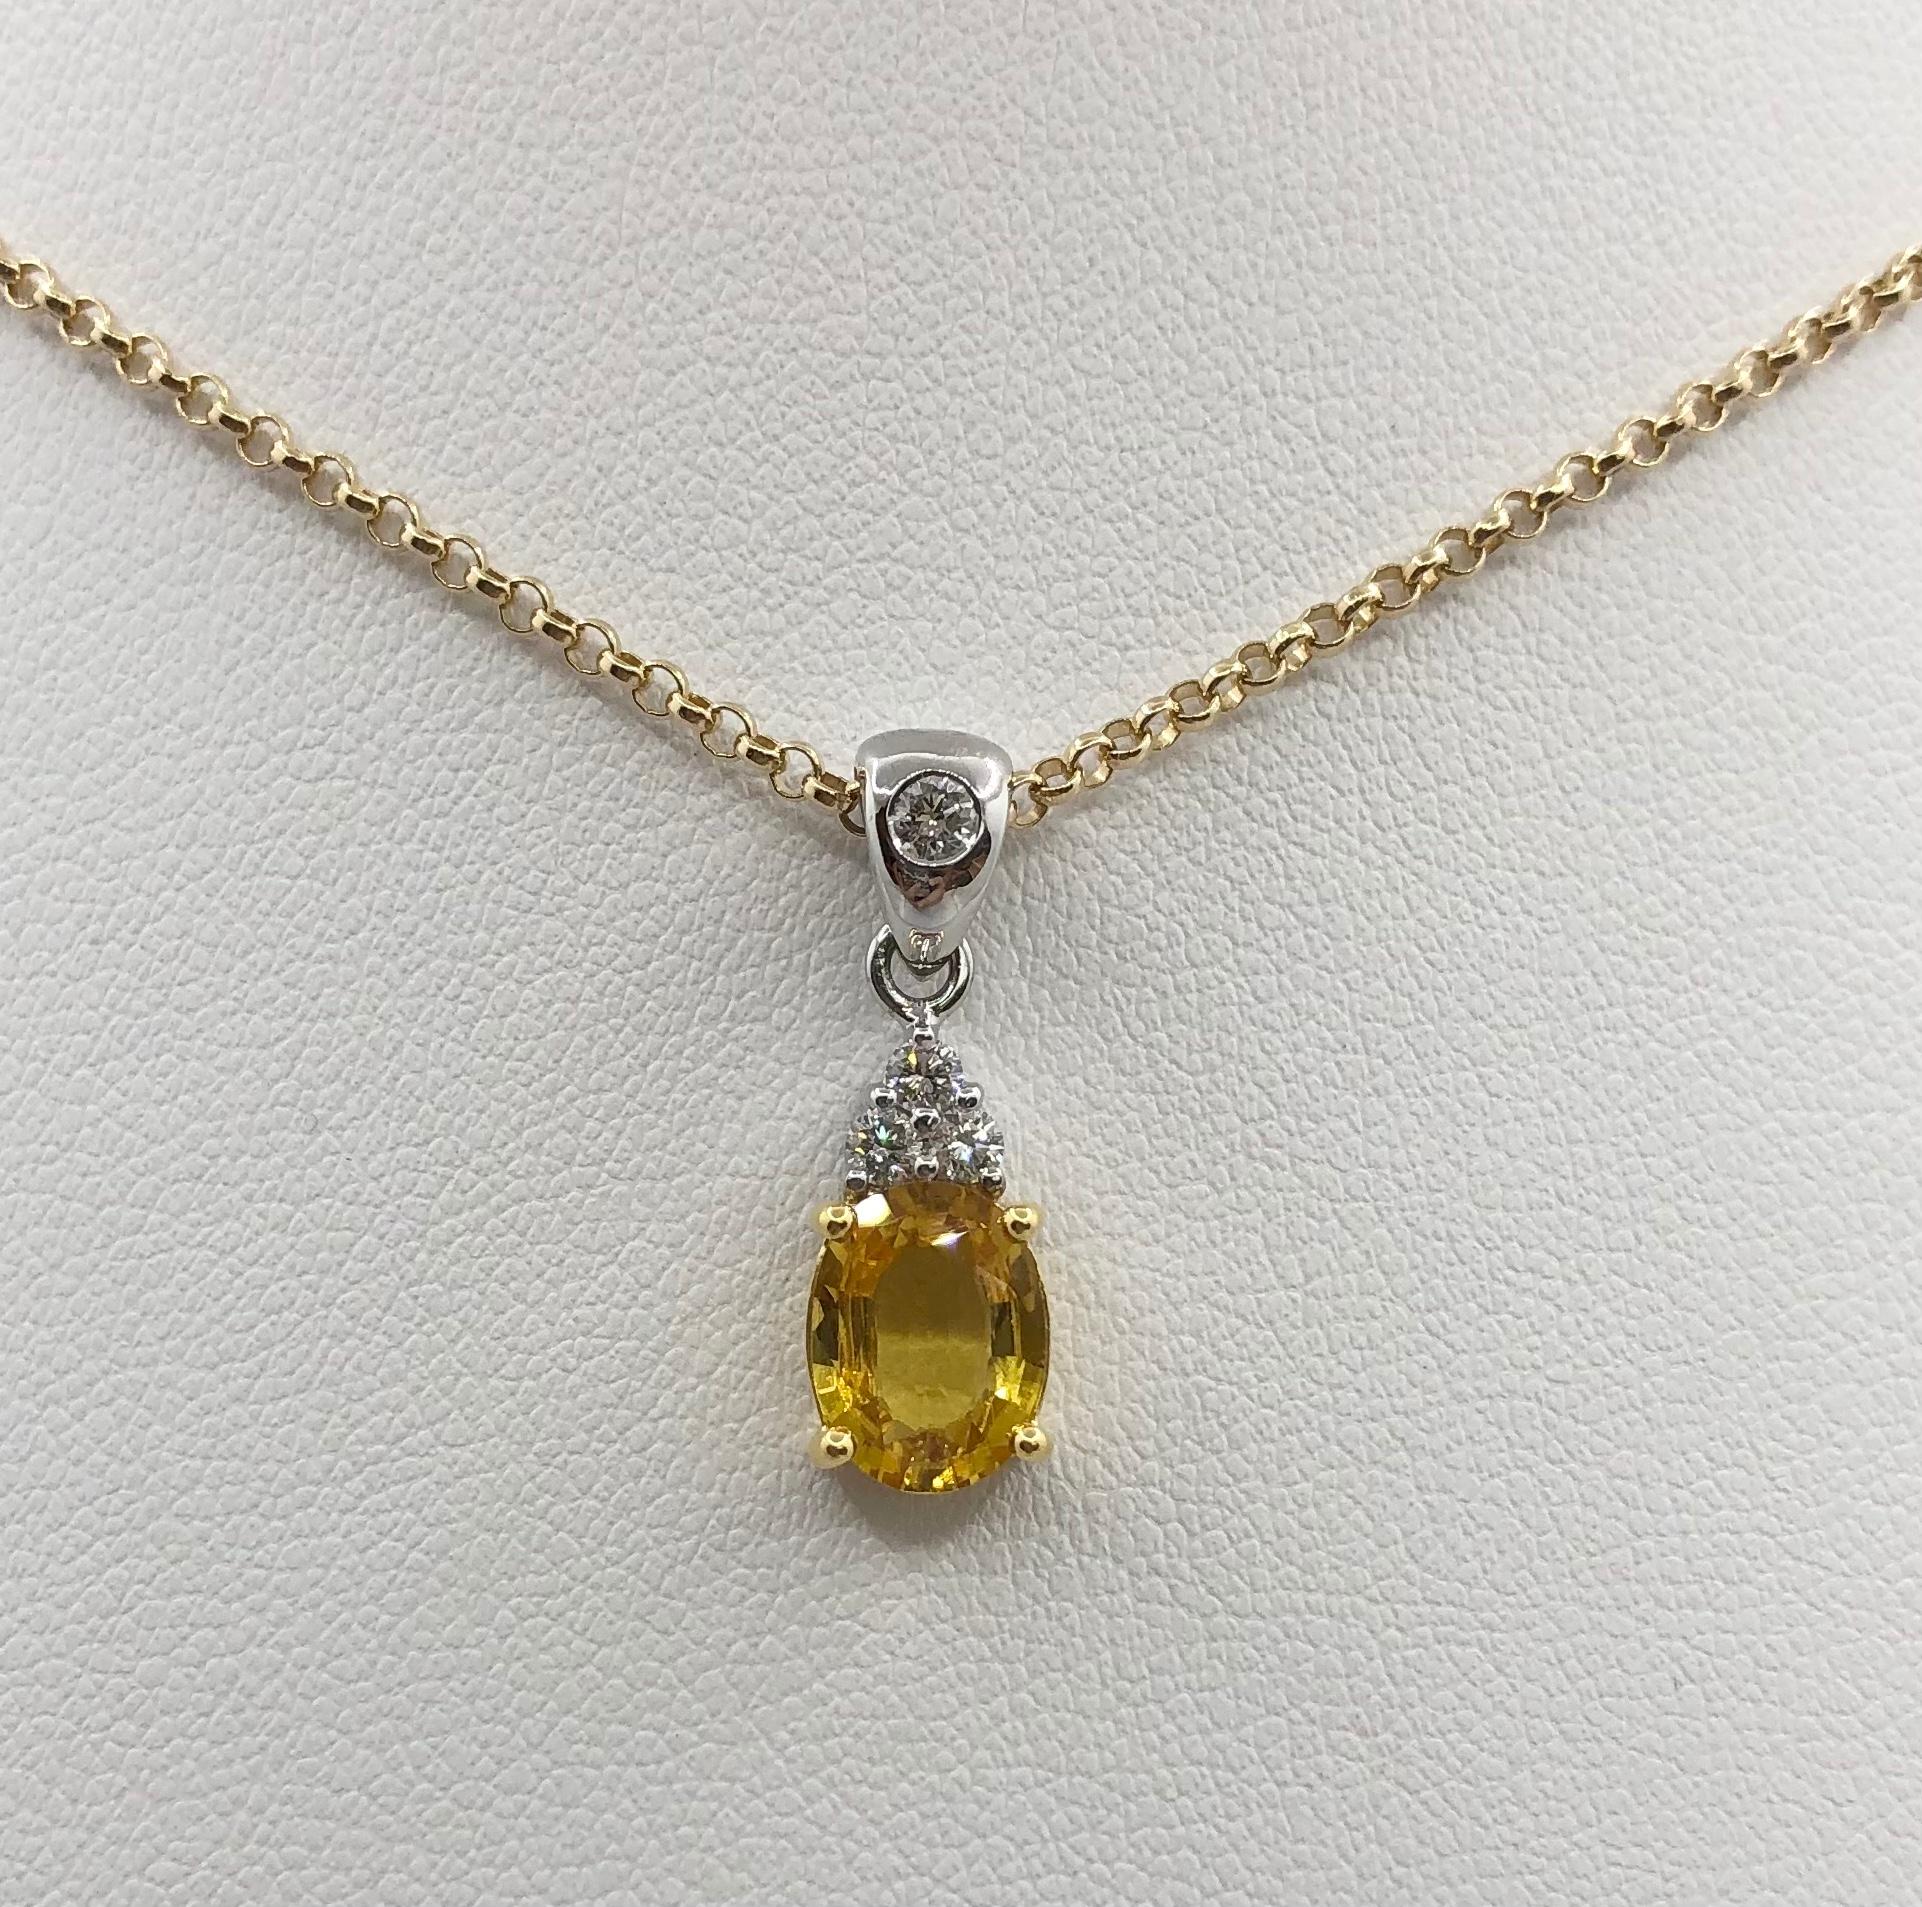 Yellow Sapphire 1.64 carats with Diamond 0.18 carat Pendant set in 18 Karat White Gold Settings
(chain not included)

Width: 0.7 cm 
Length: 2.0 cm
Total Weight: 2.55 grams

